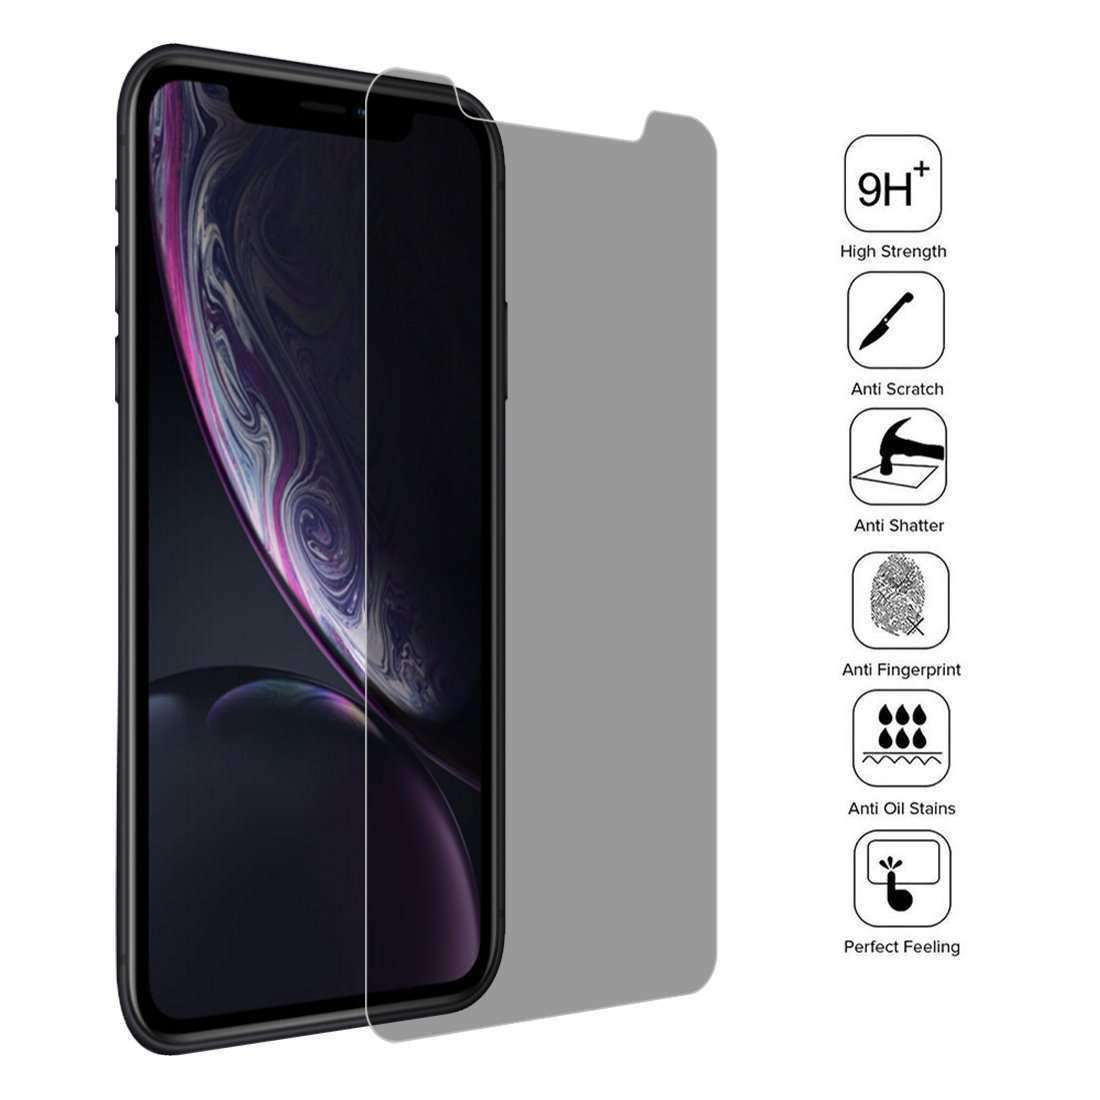 AMZER Privacy Tempered Glass Screen Protector for iPhone Xr/ iPhone 11 - pack of 2